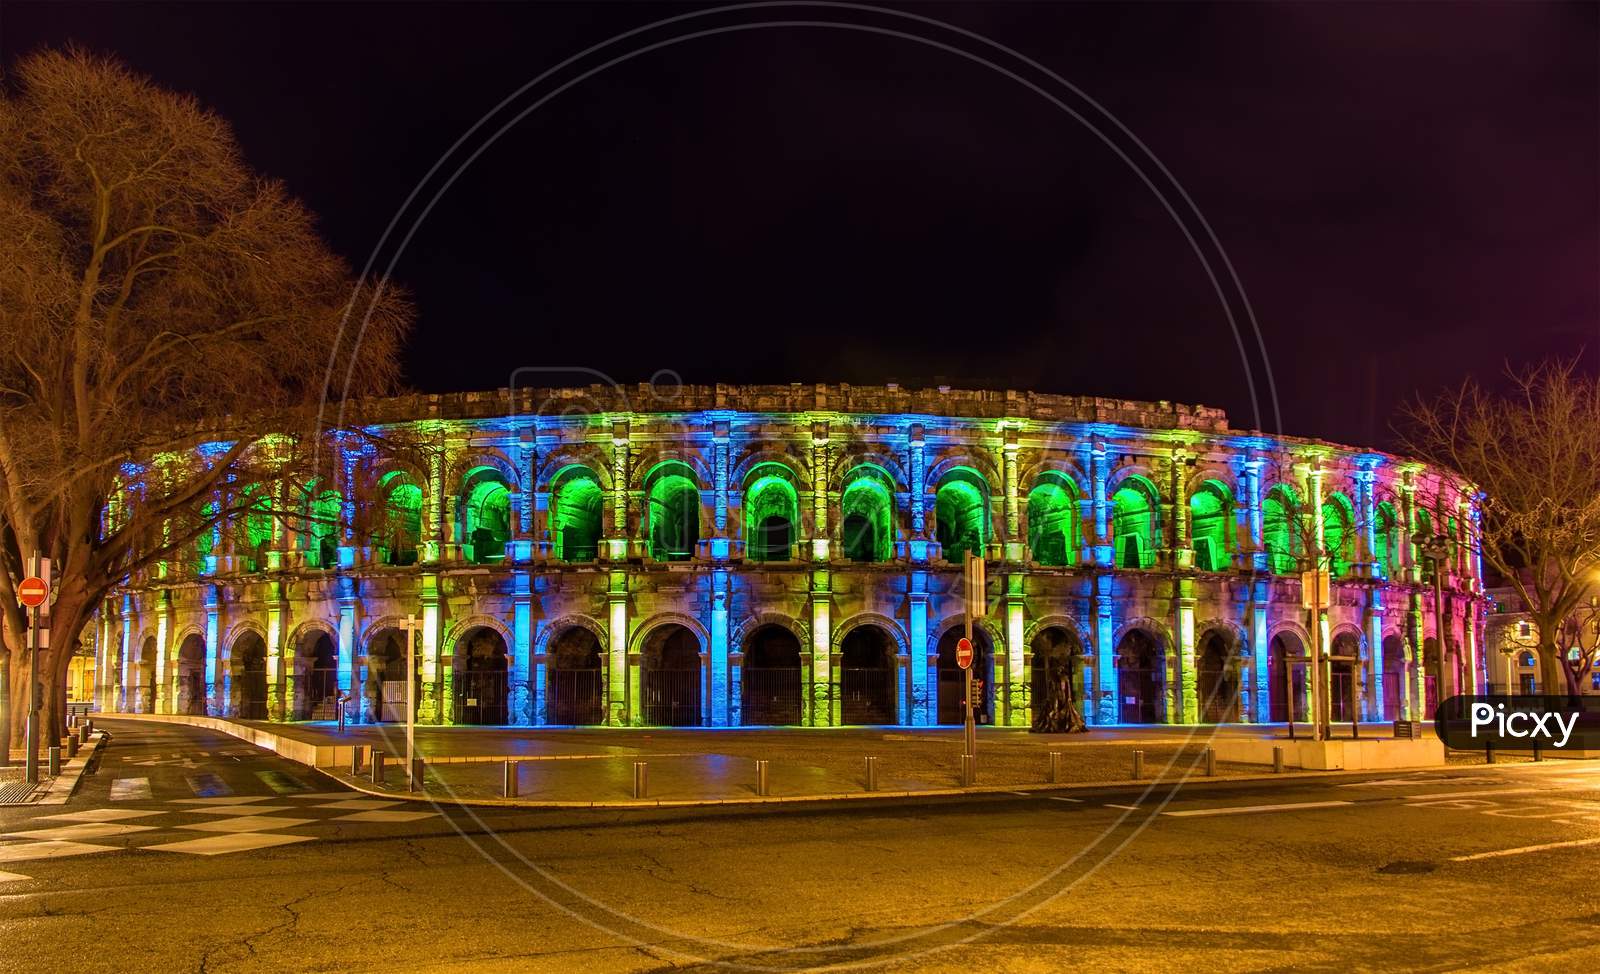 Roman Amphitheatre, Arena Of Nimes, In The Evening - France